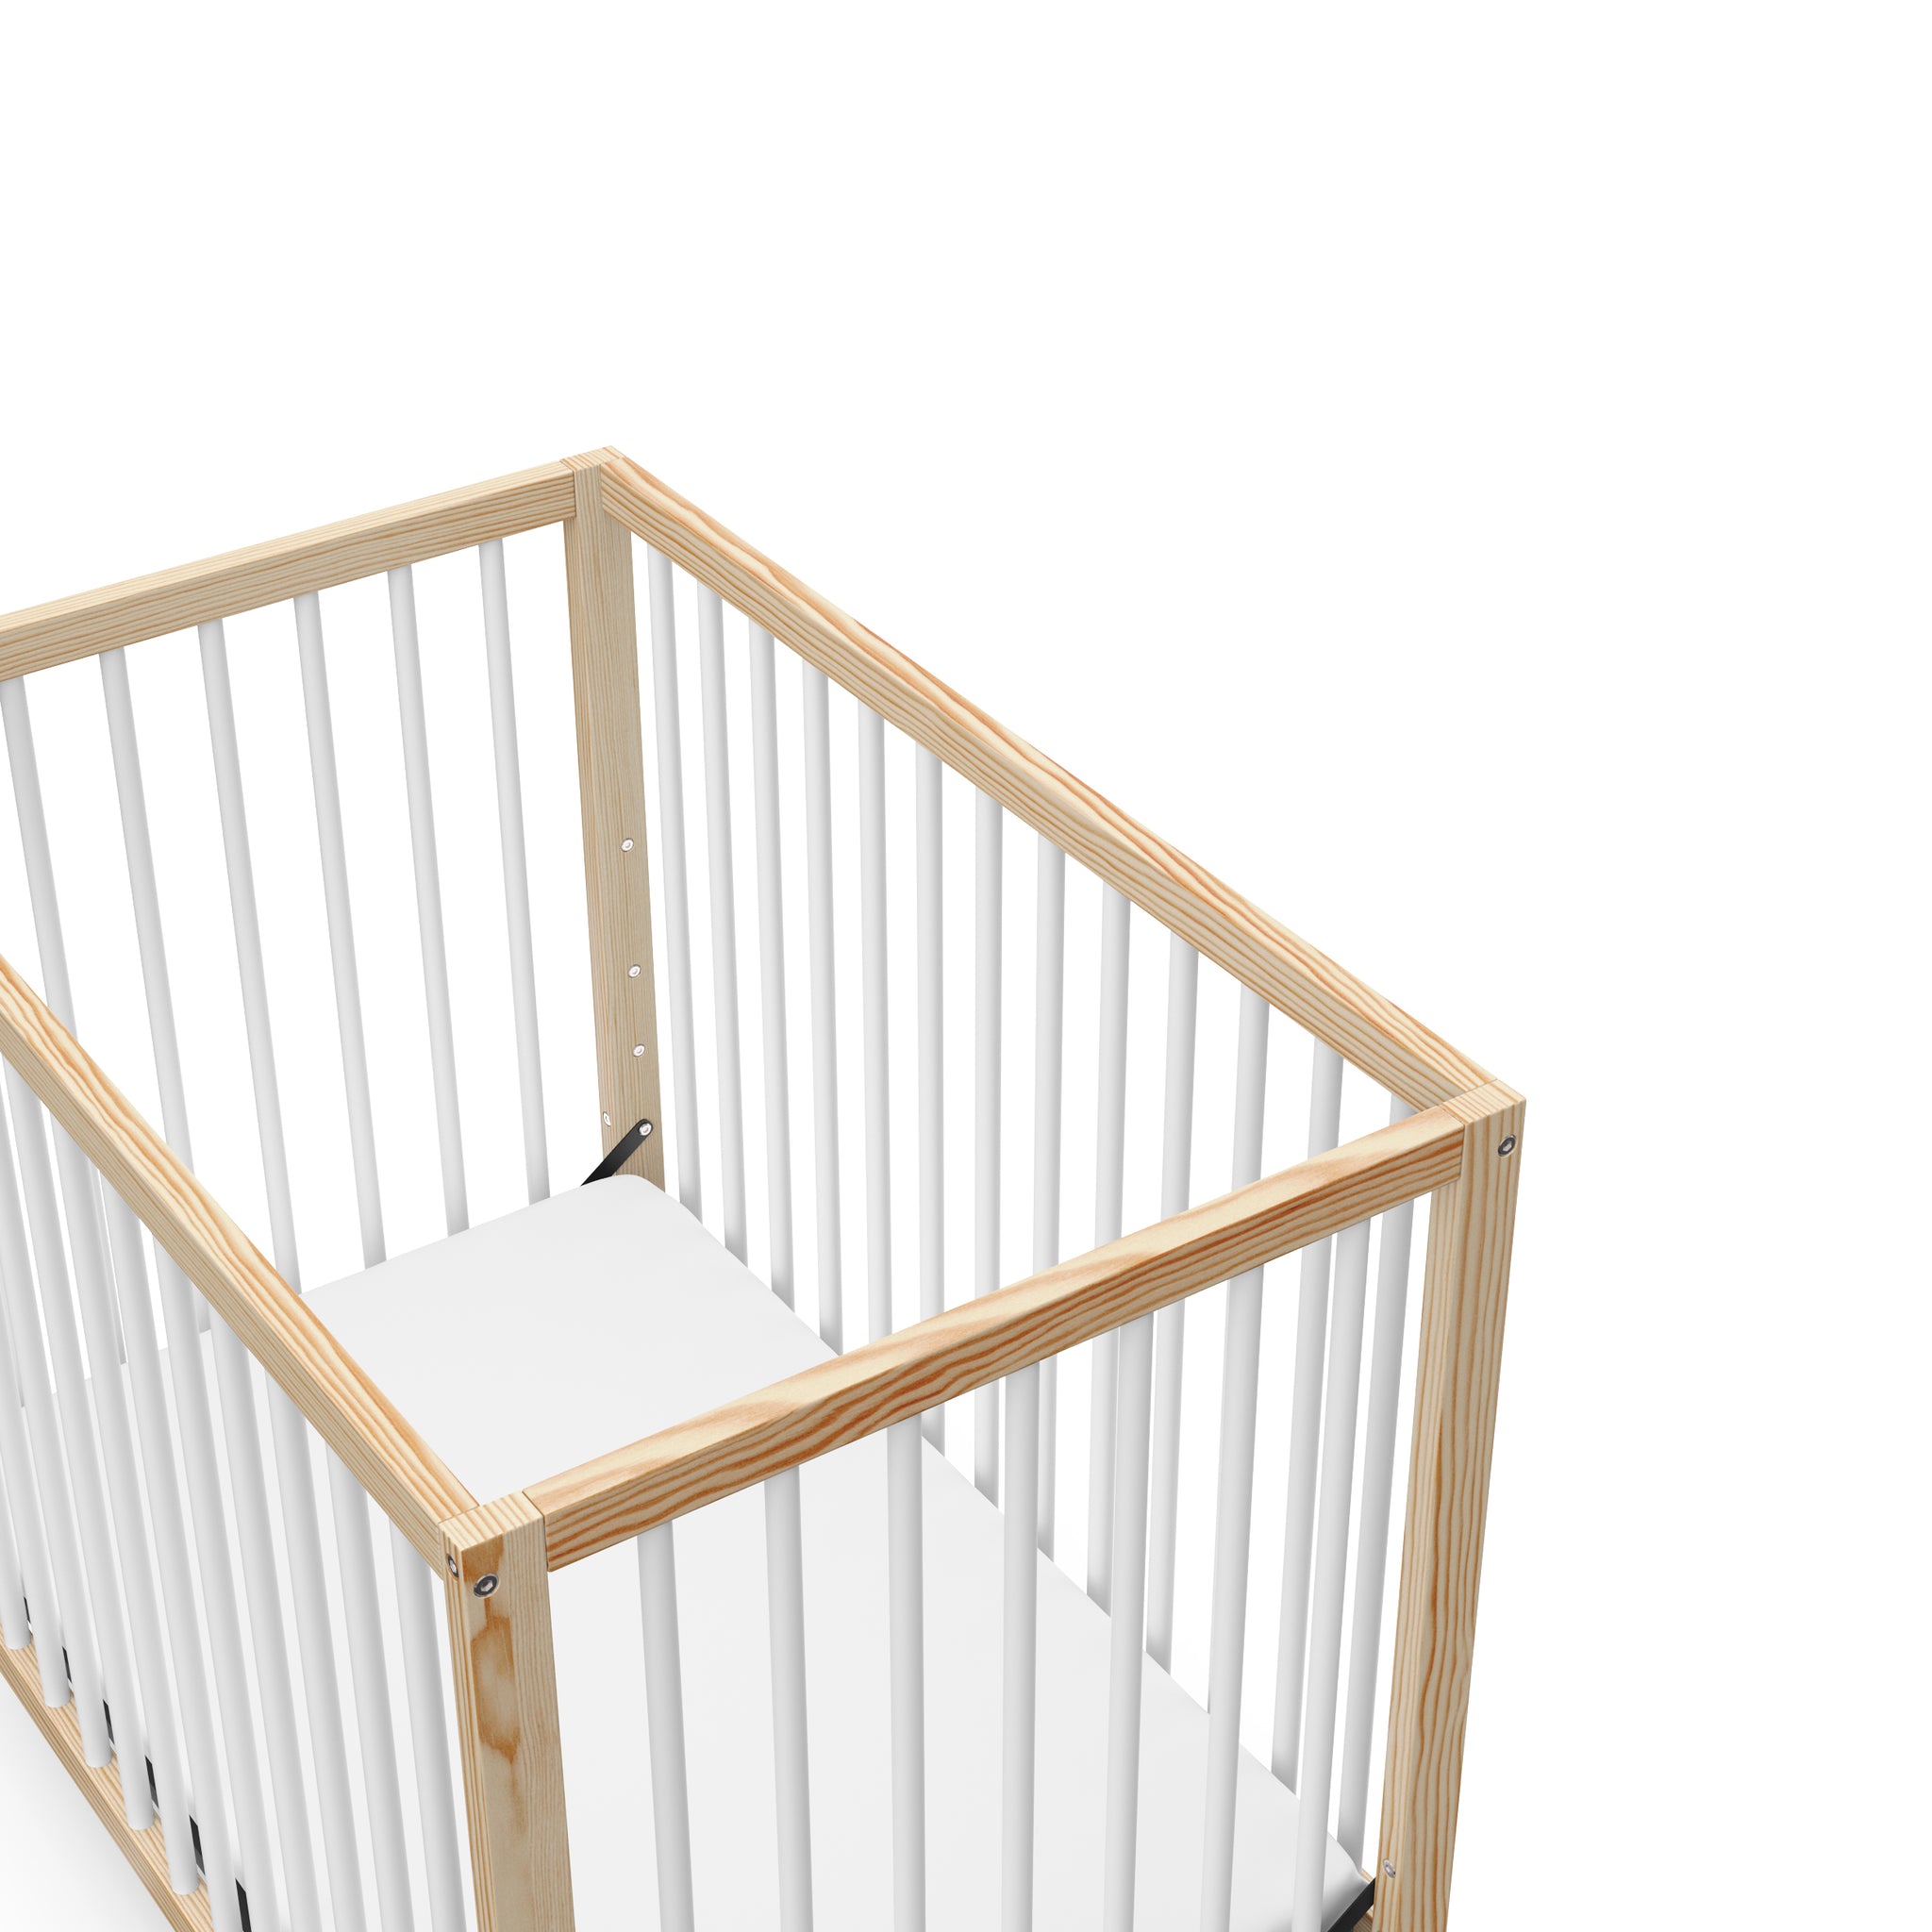 close-up view of Natural with white mini crib's headboard